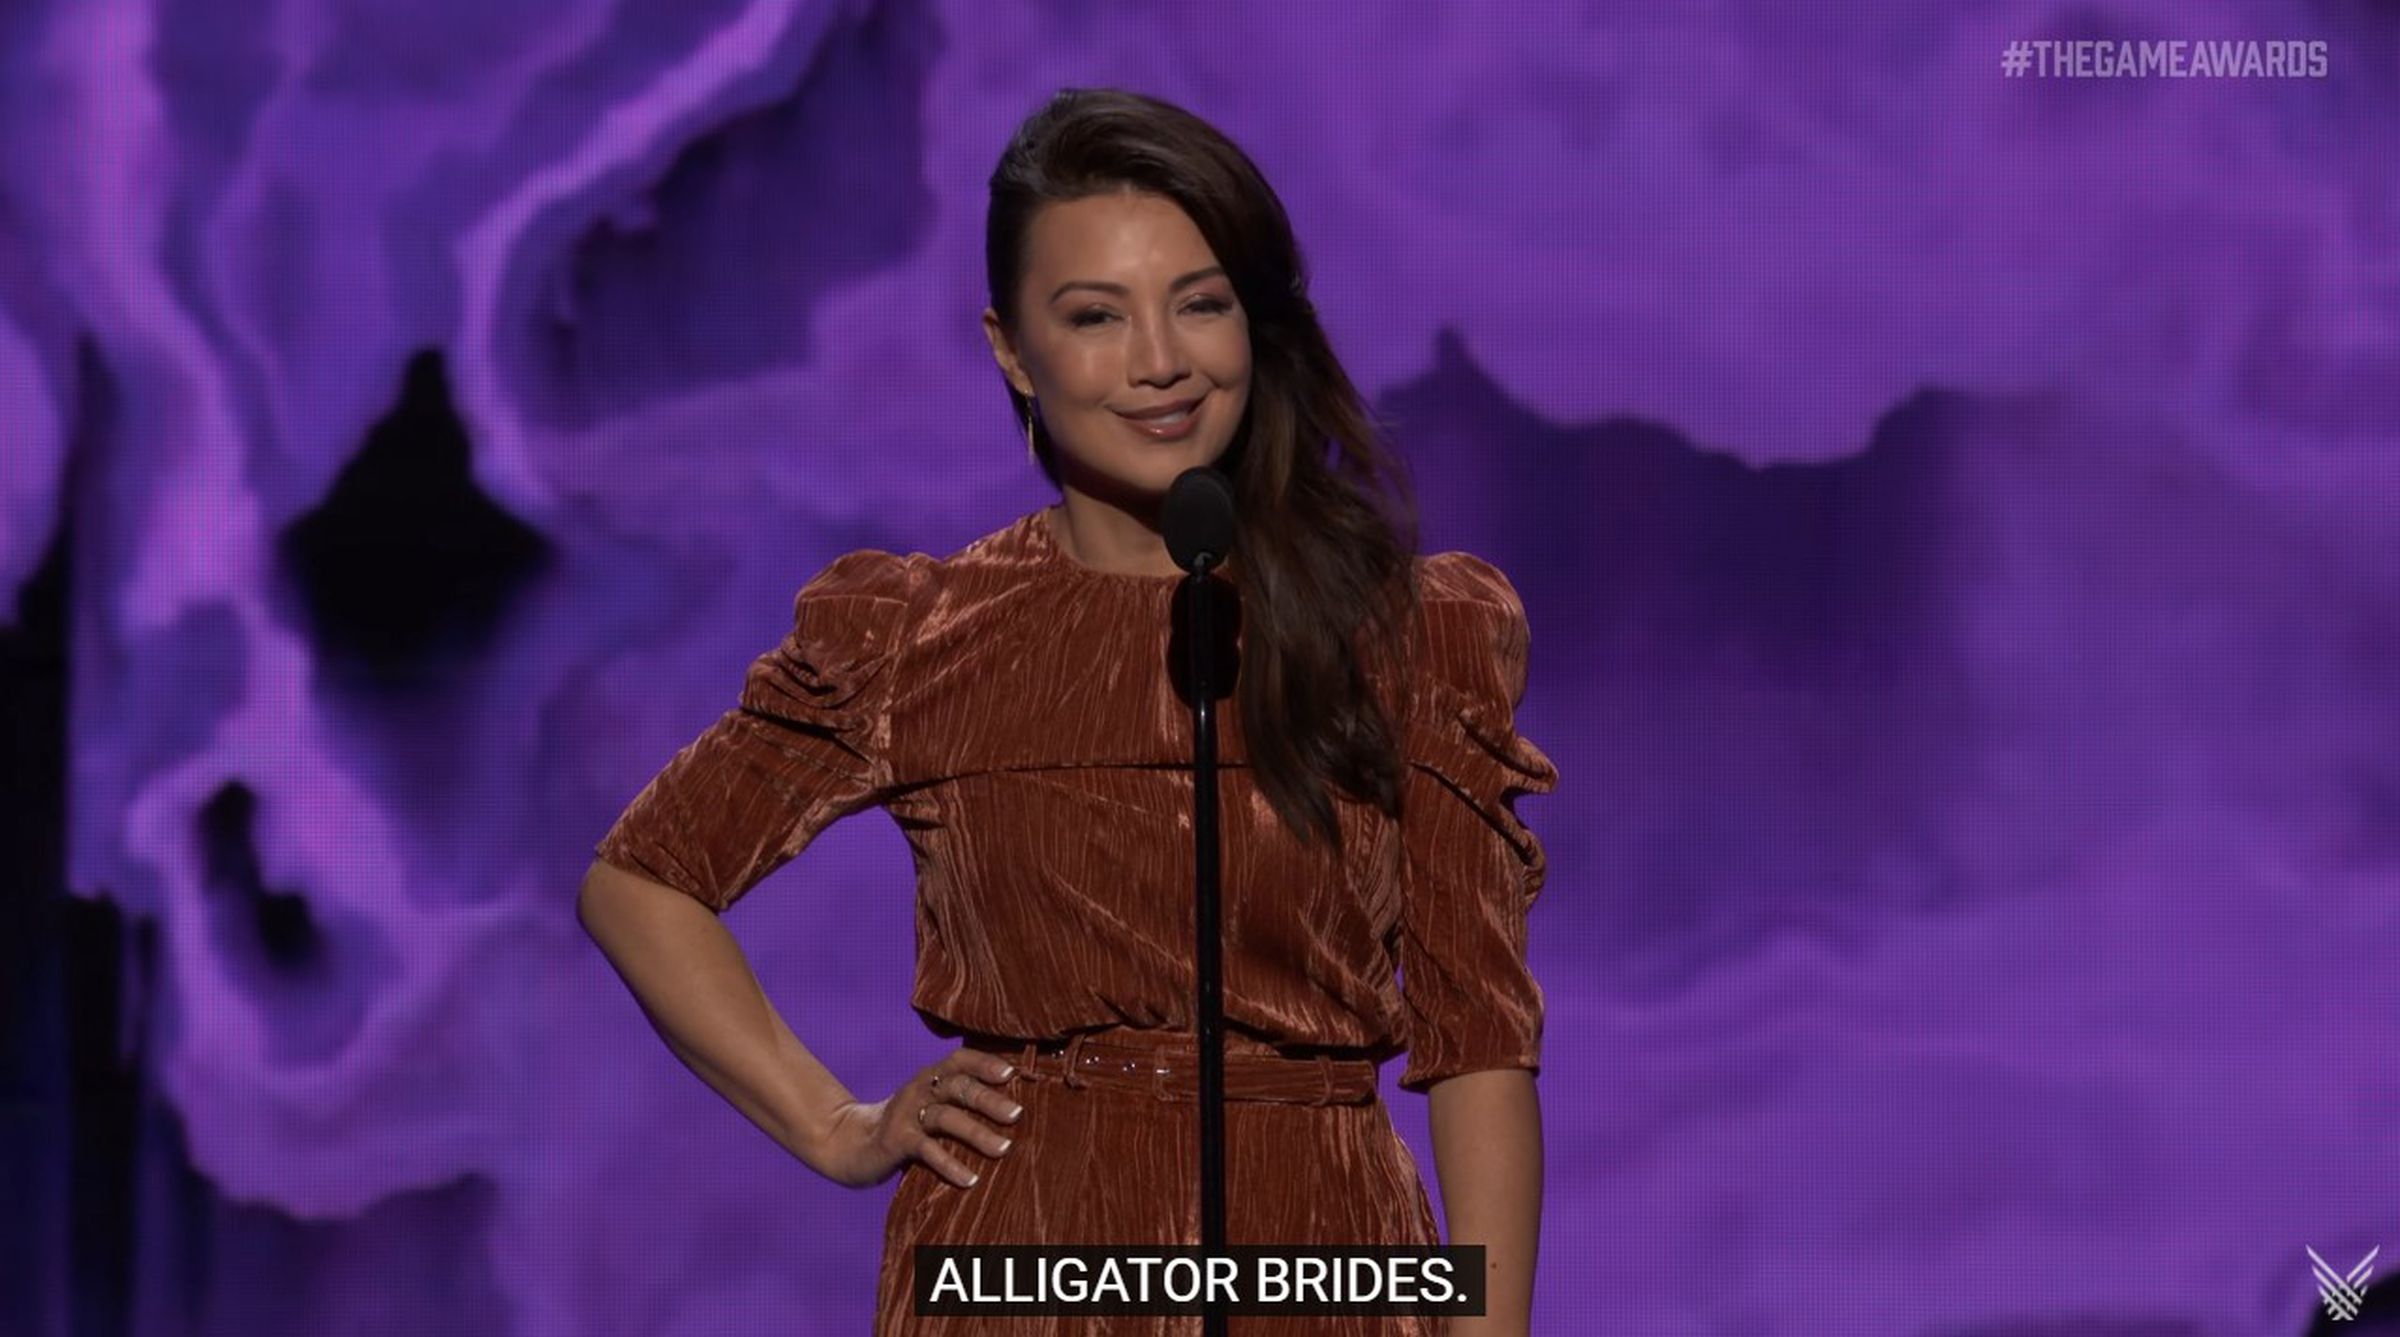 You’d be forgiven for thinking this is just YouTube’s caption service being its normal weird self, but she actually said “alligator brides.”